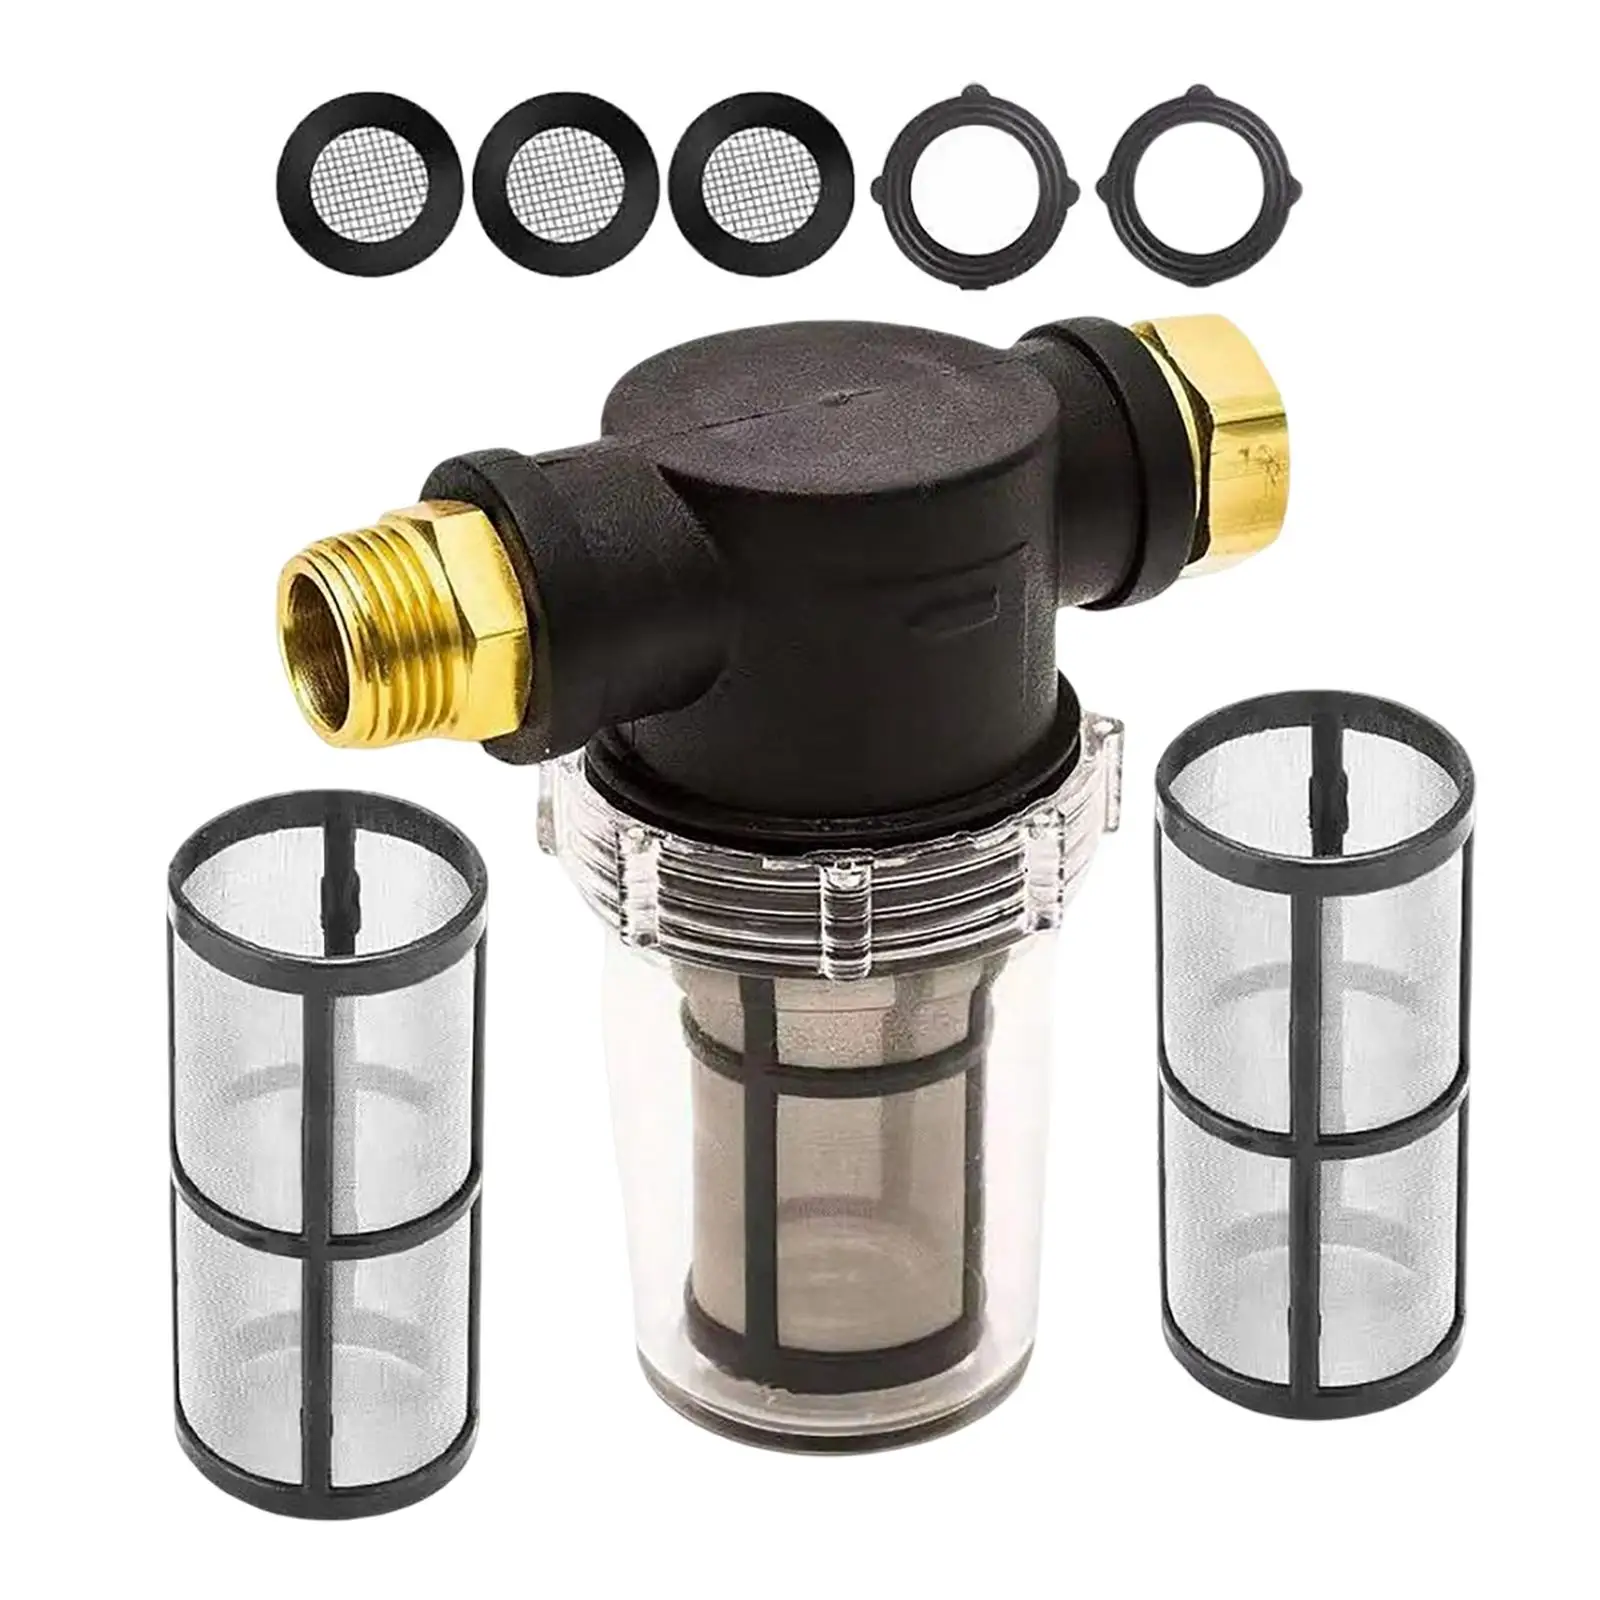 Filter for Pressure Washer Inlet Water Garden Hose Sediment Filter for Camping RV